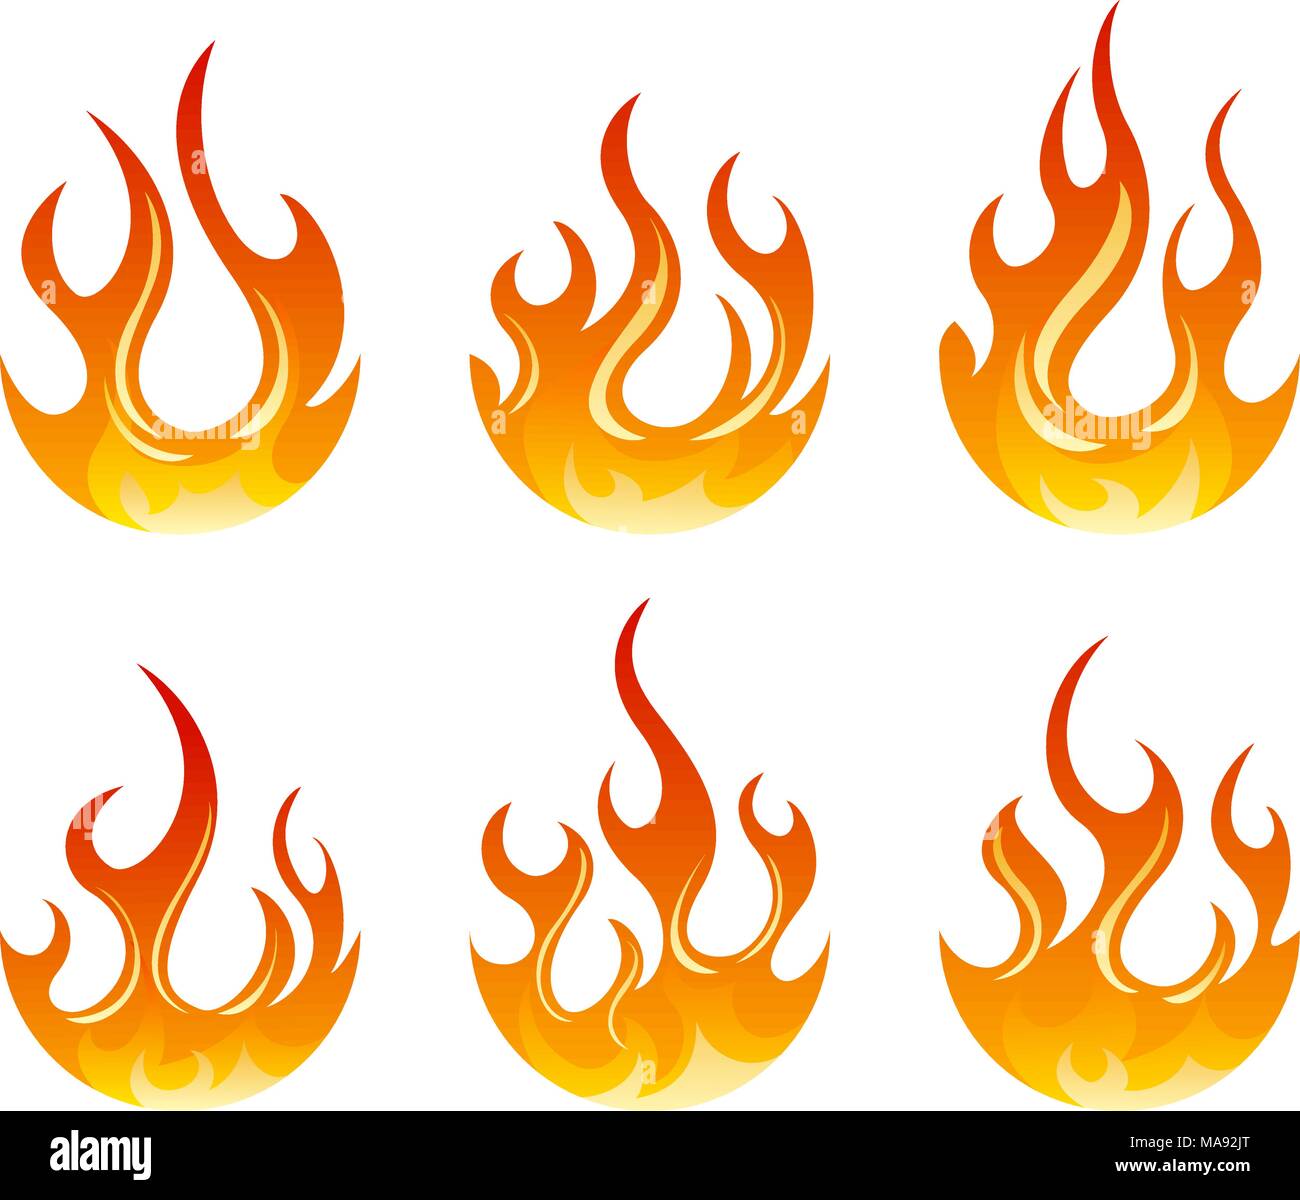 Fire and Flames - Vector Graphic Elements